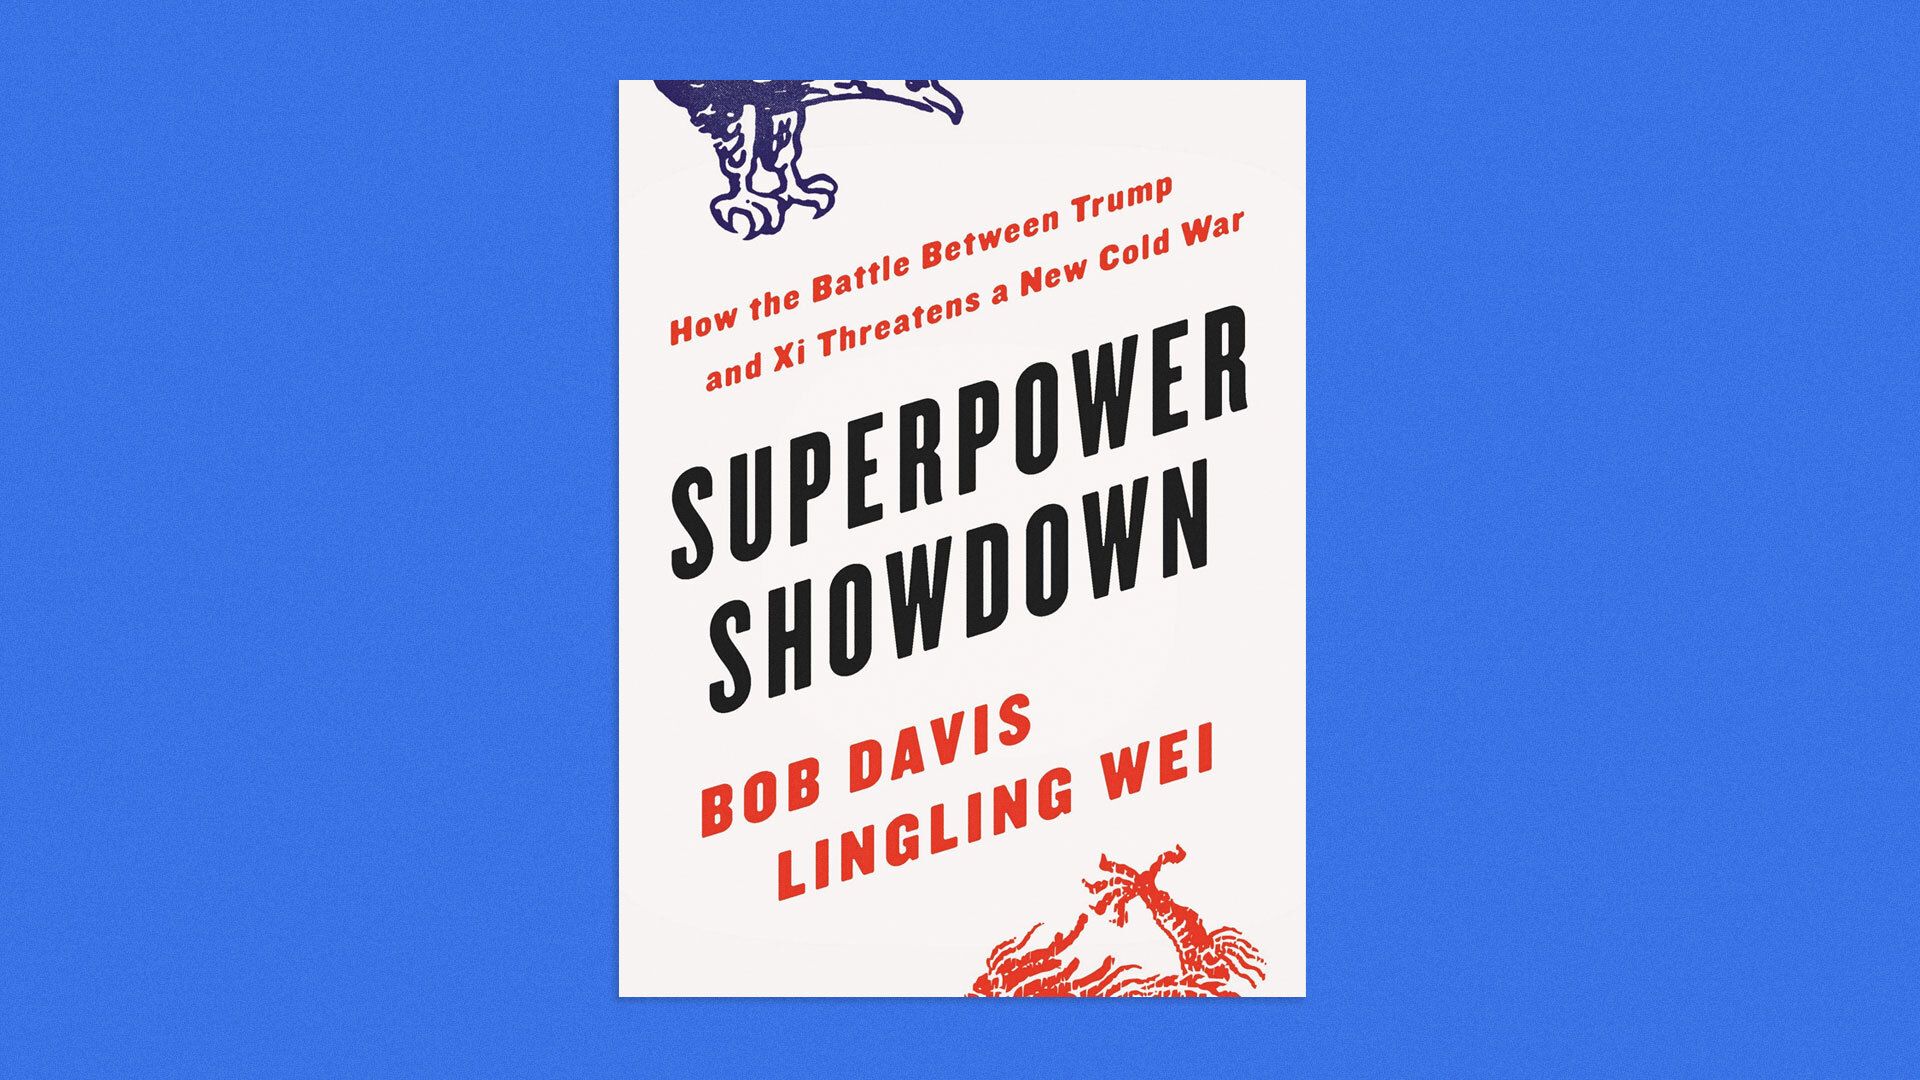 The cover image of the book Superpower Showdown by Bob Davis and Lingling Wei